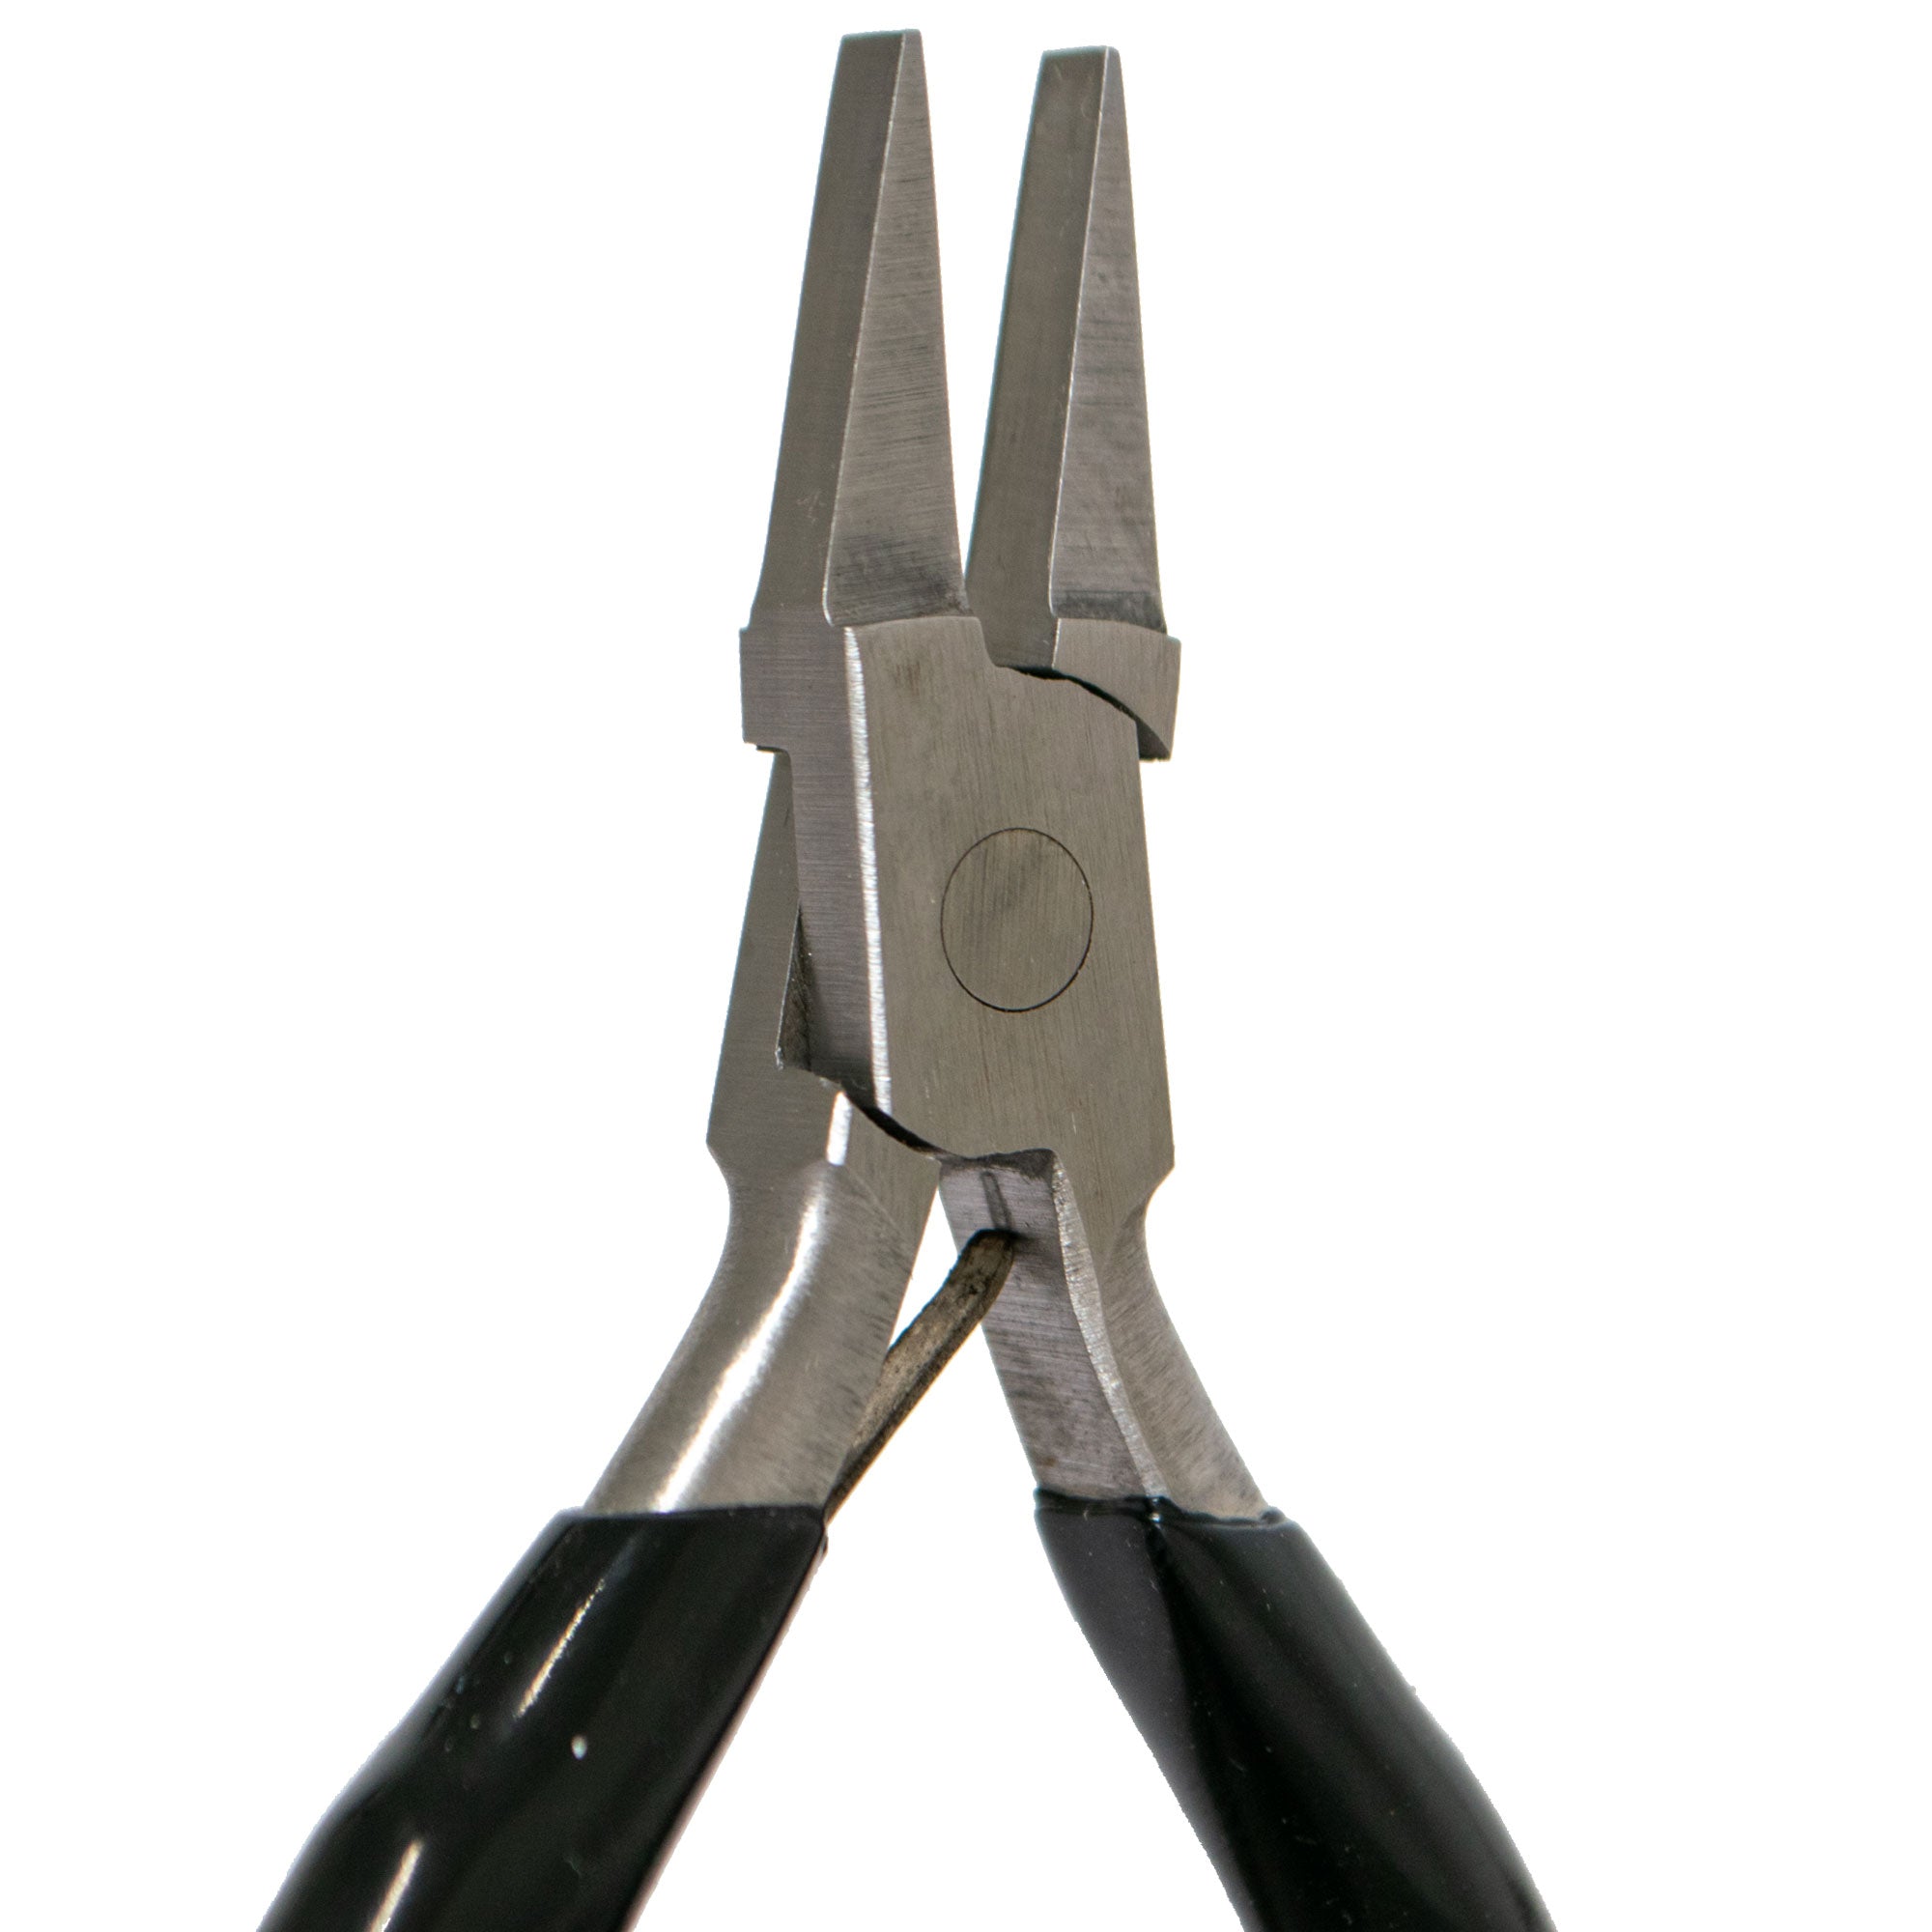 Miniature Snub-nose Pliers, 3 inches